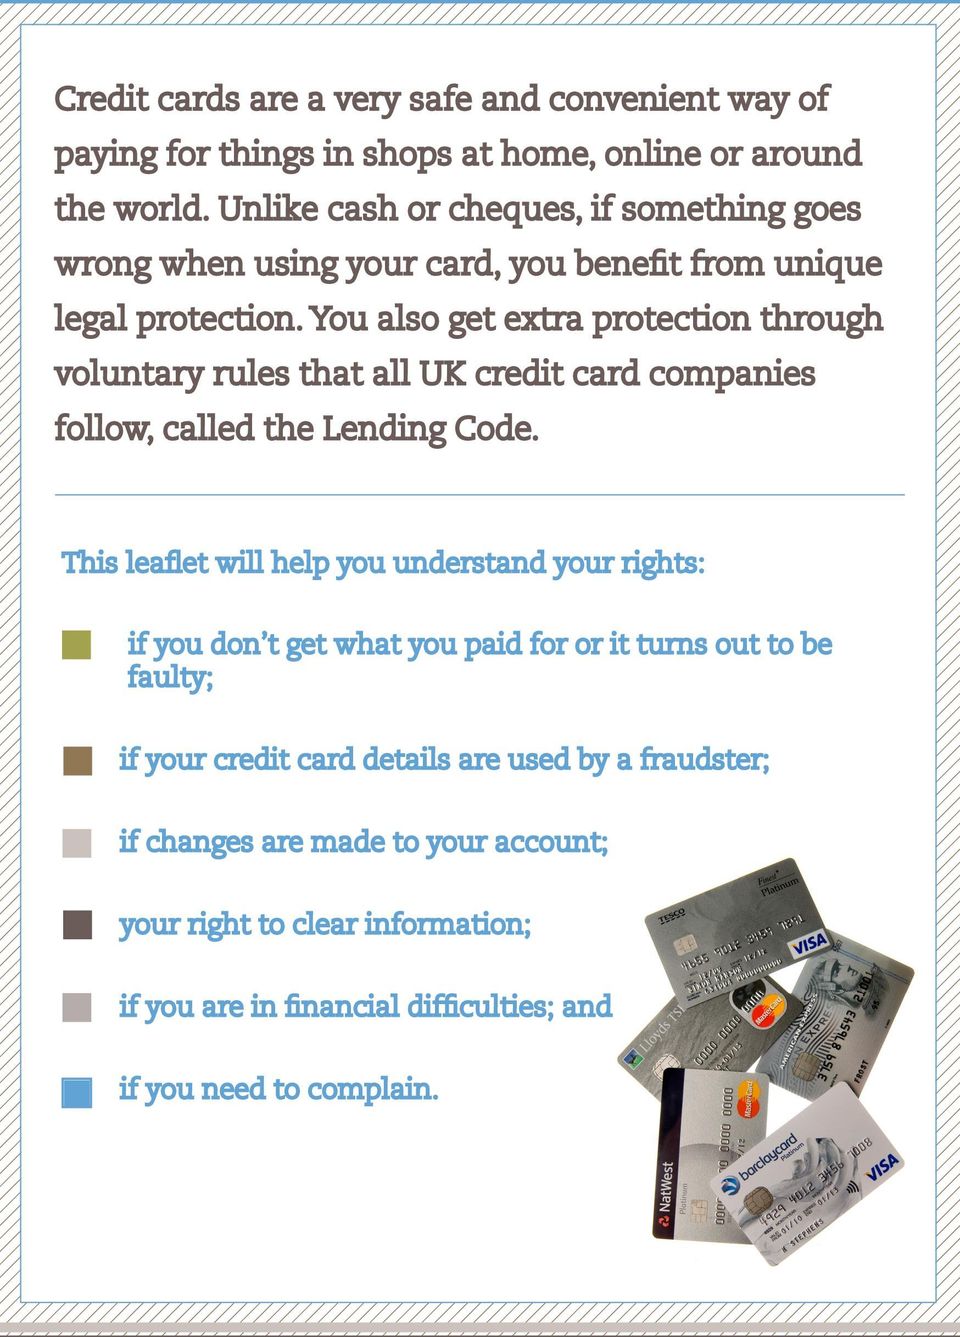 You also get extra protection through voluntary rules that all UK credit card companies follow, called the Lending Code.